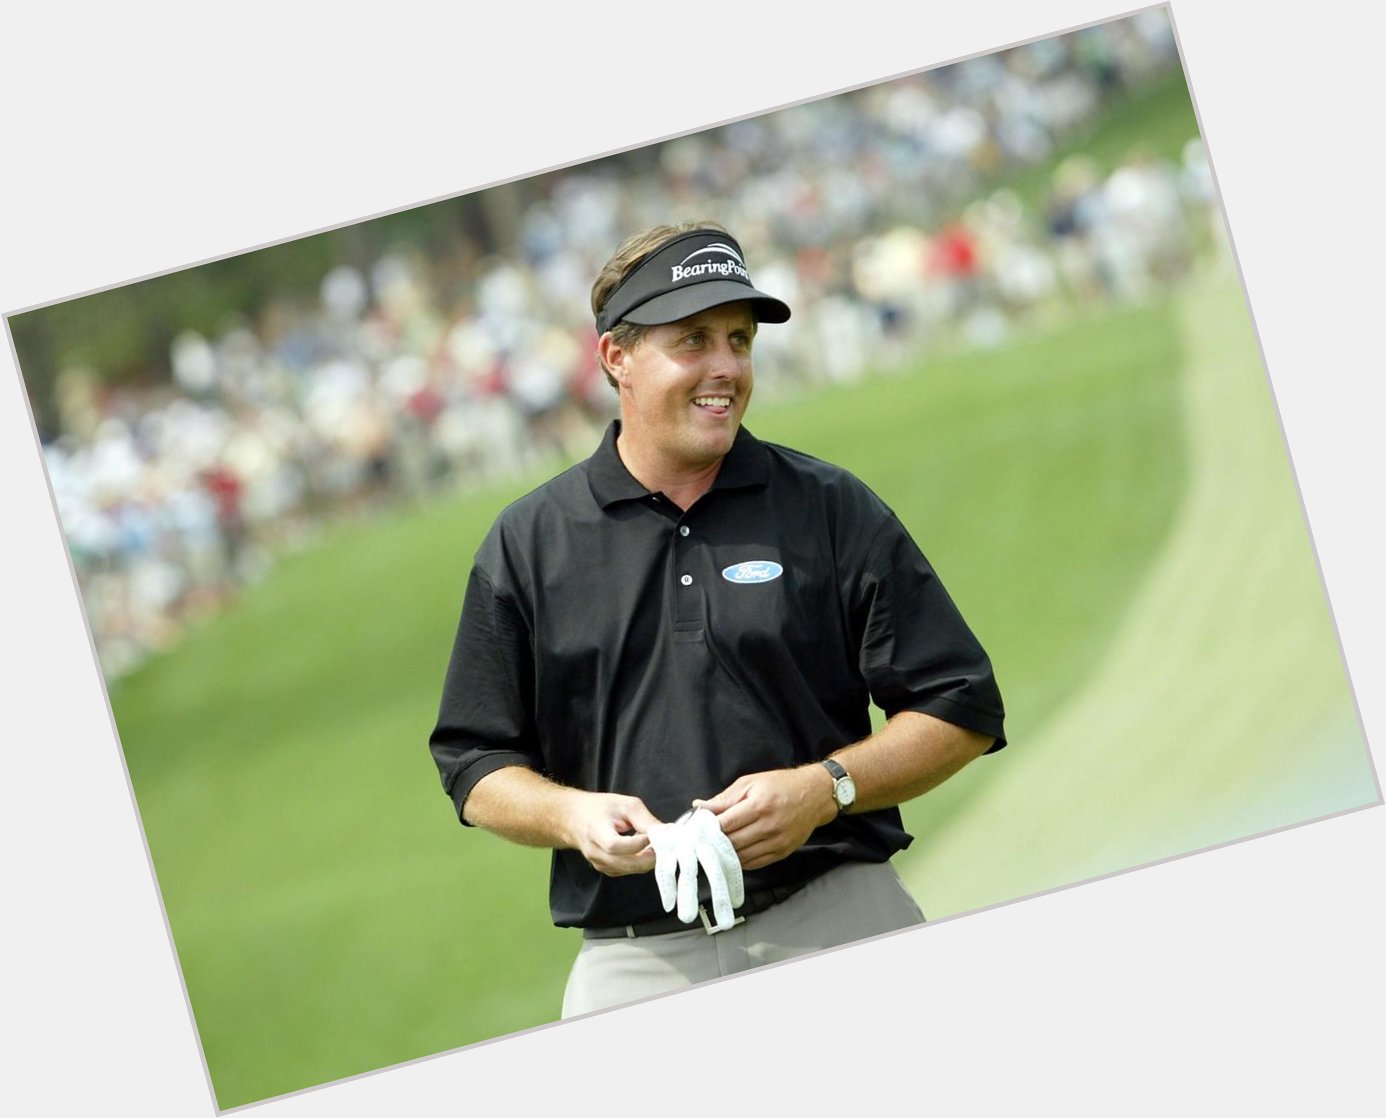 Happy Birthday to Phil Mickelson! Is he the best lefty golfer of all time?  